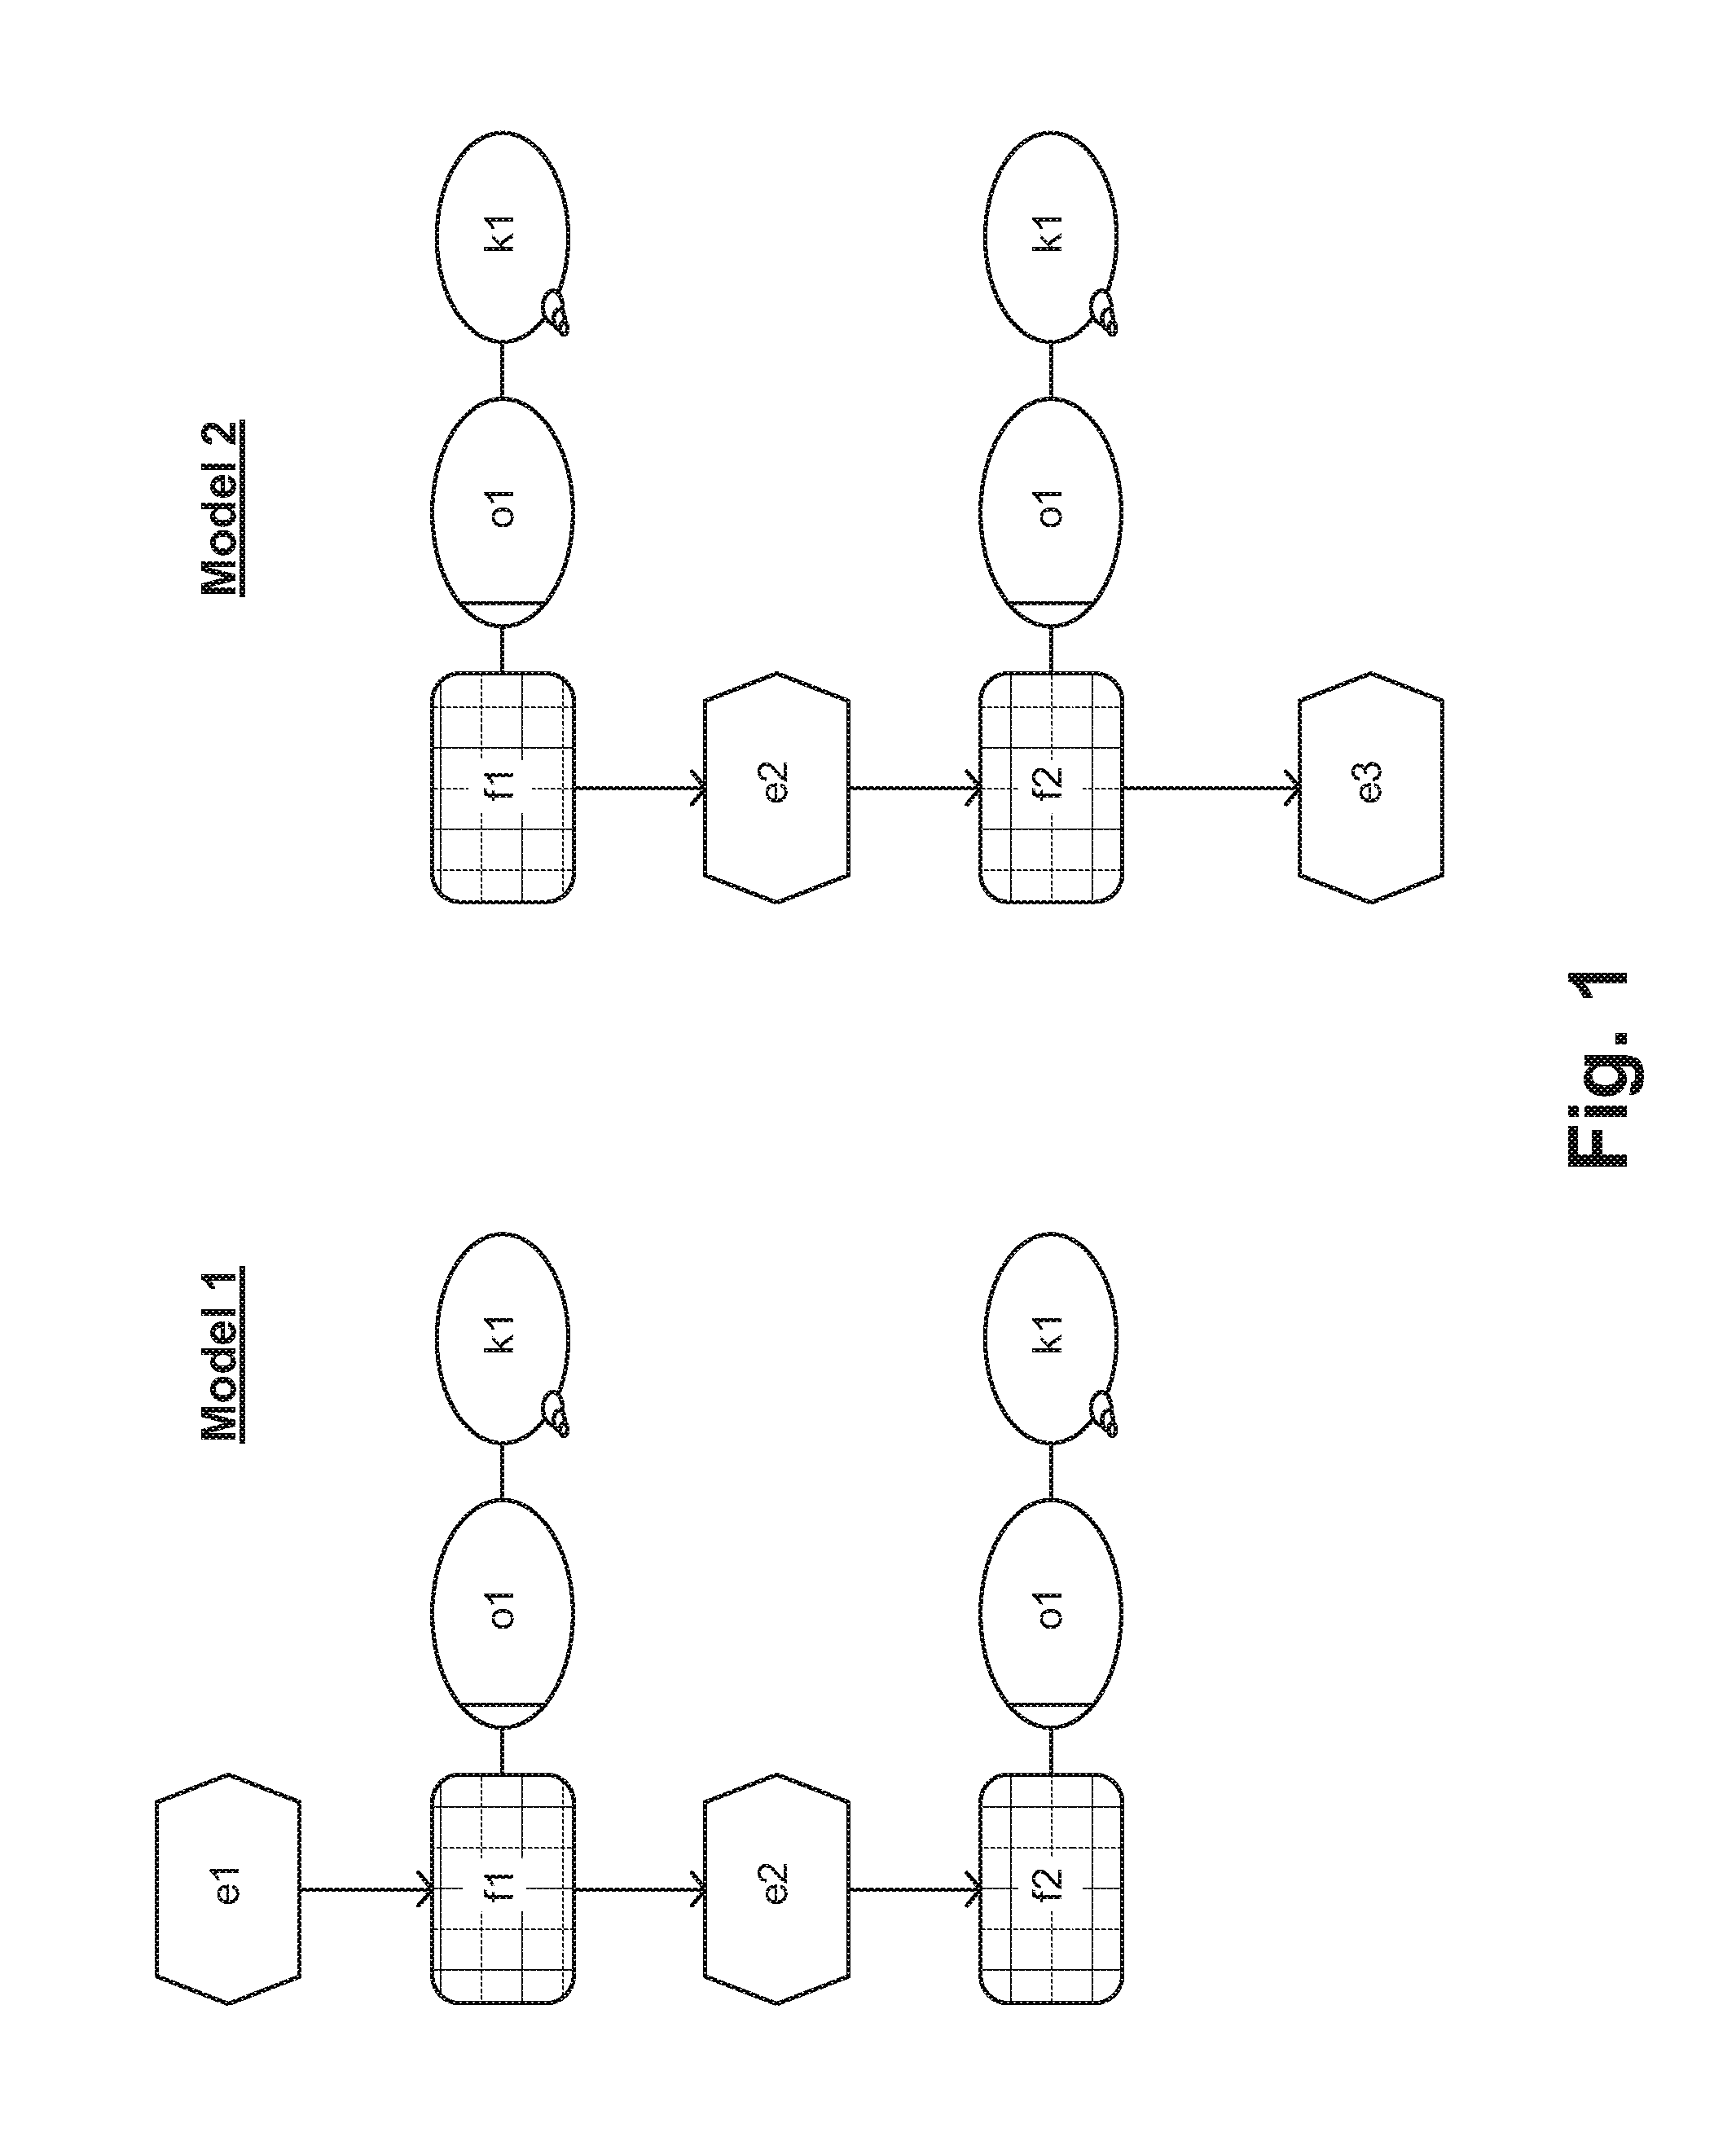 Systems and/or methods for identifying corresponding elements in different models